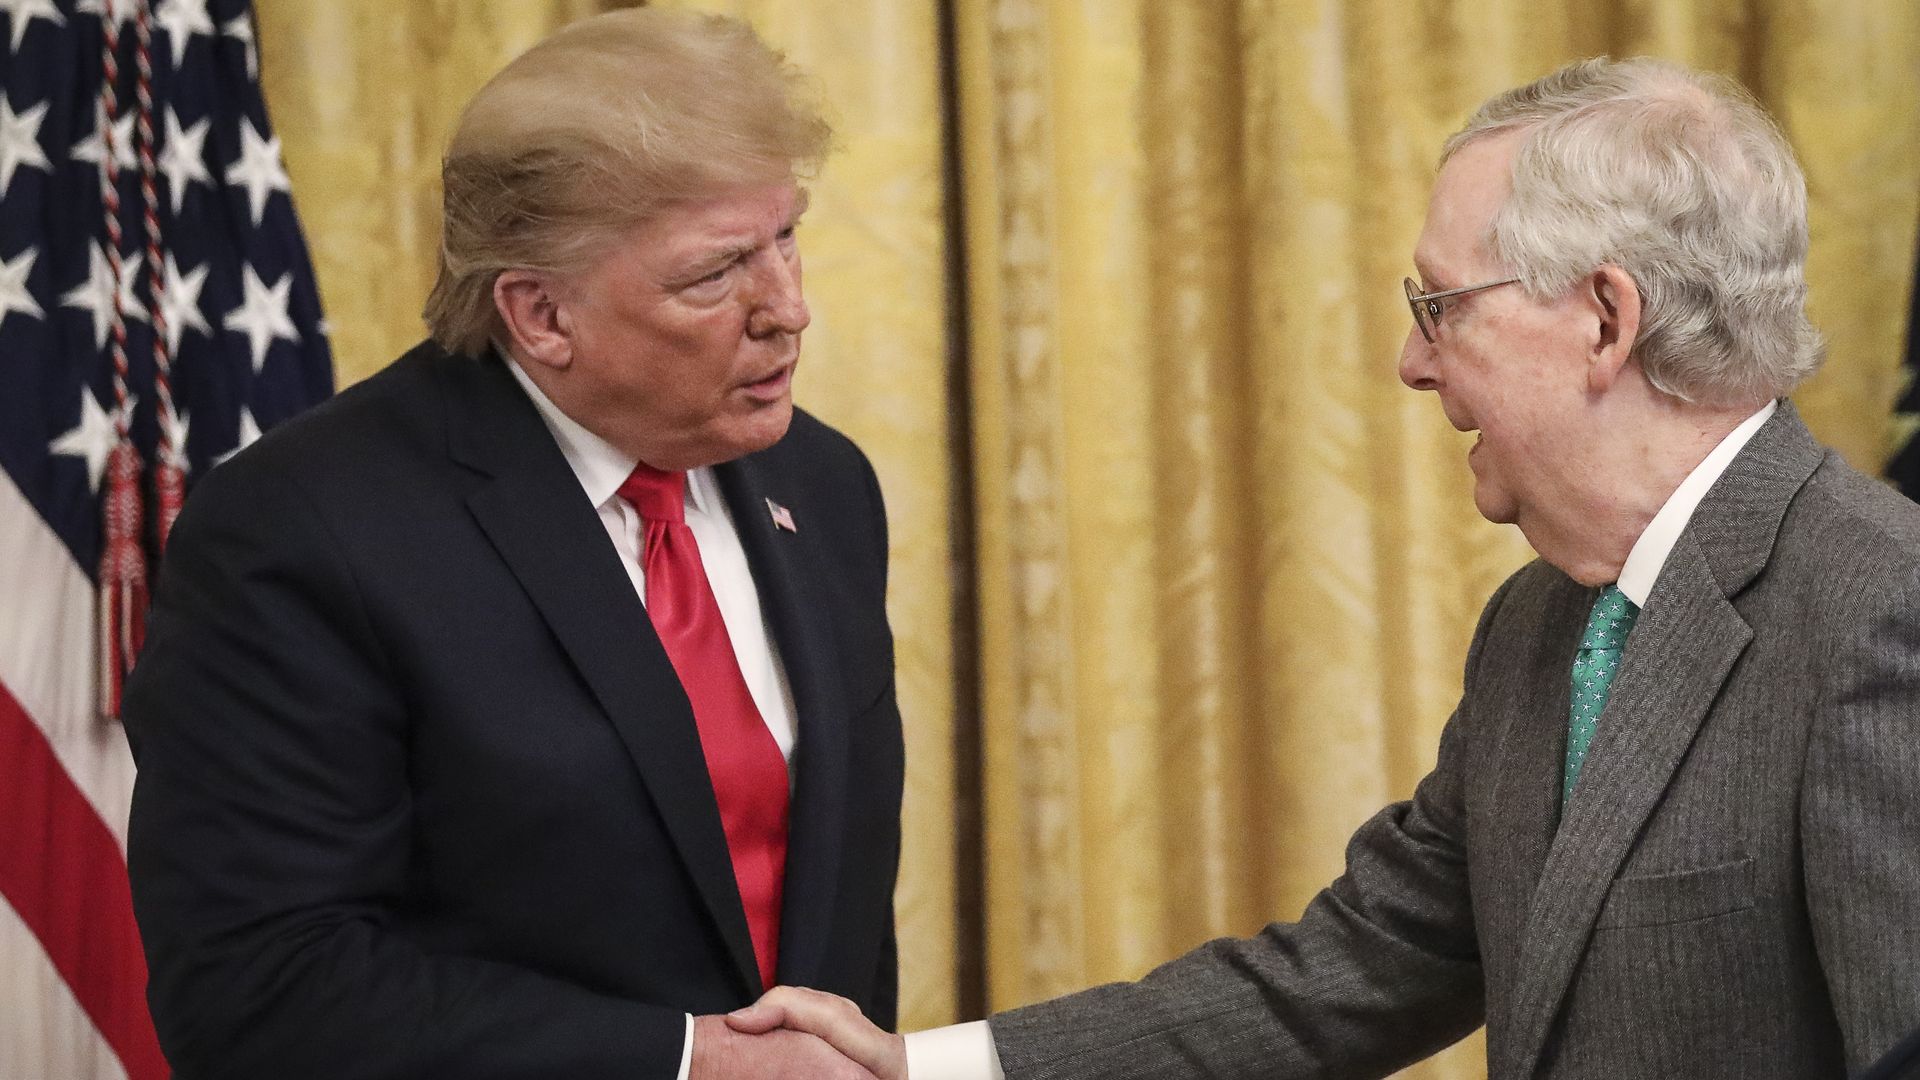 Trump and McConnell.